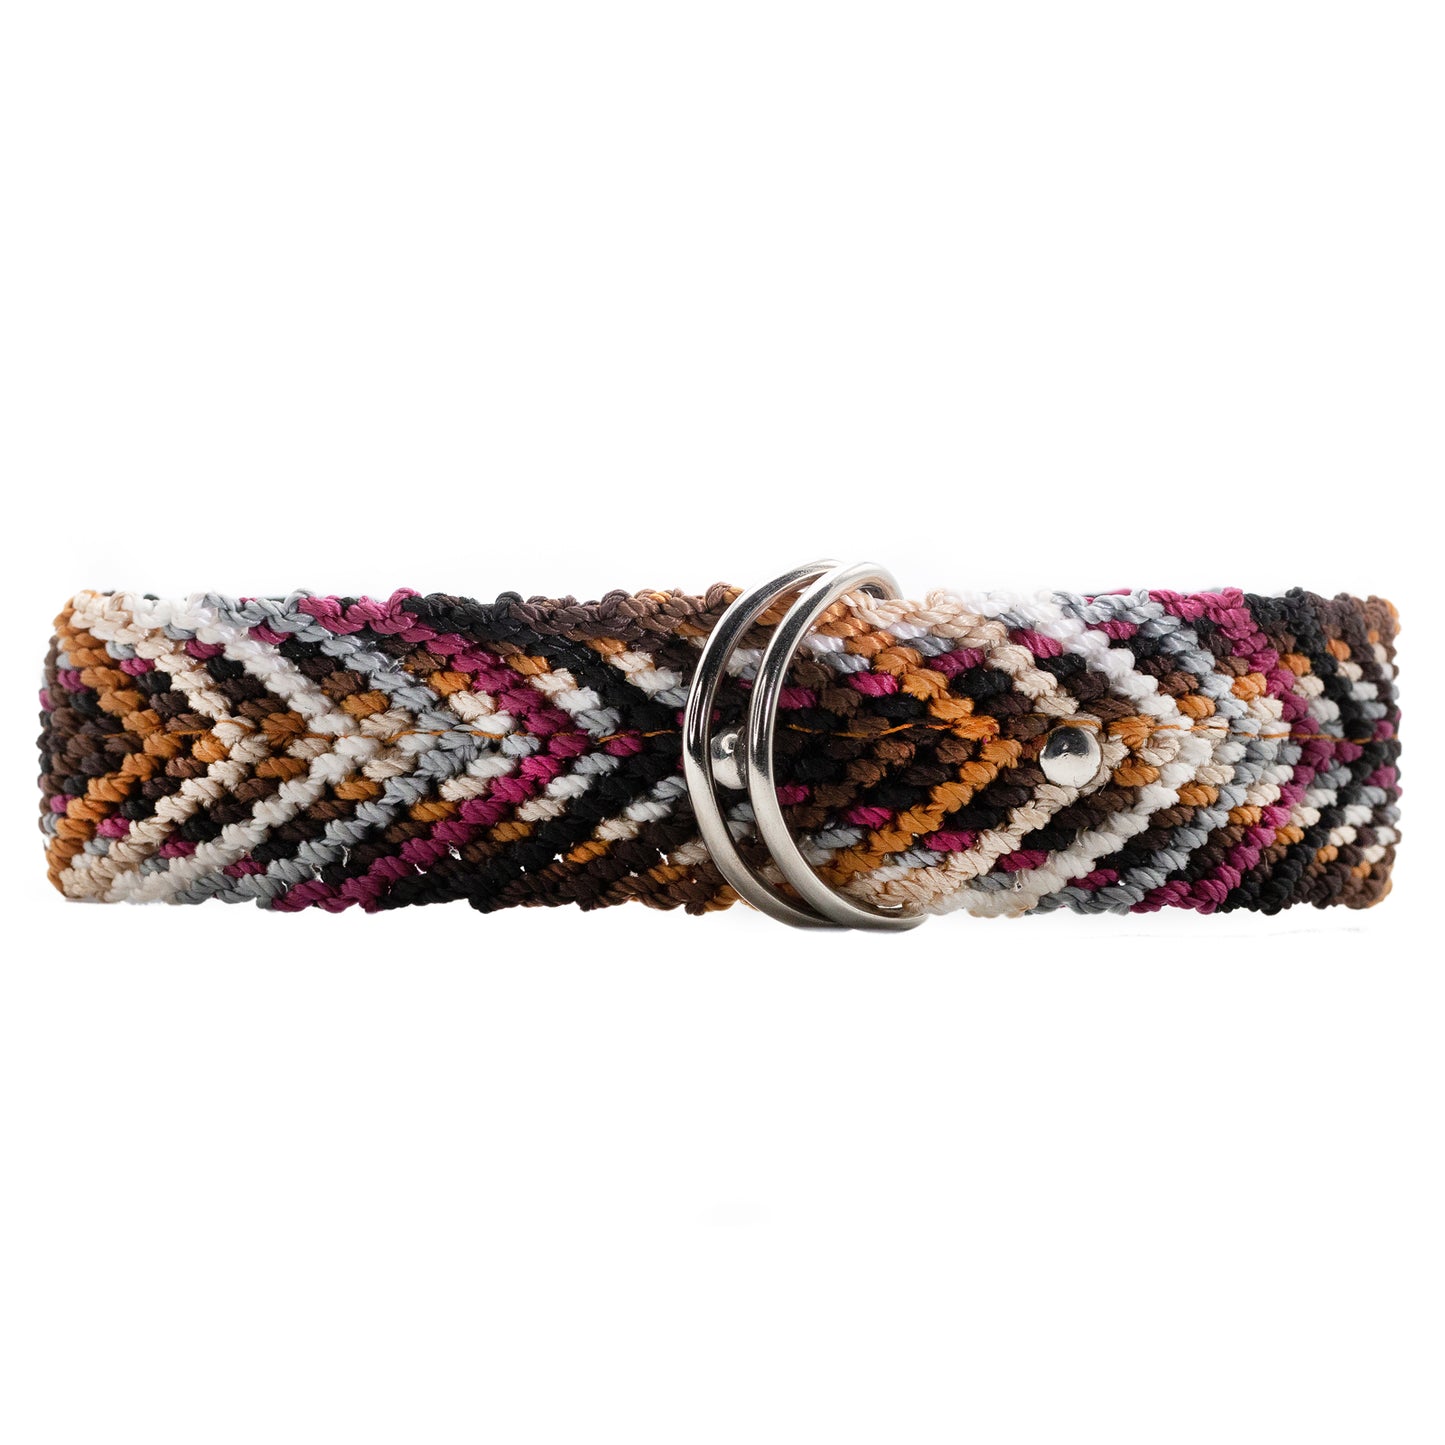 Dog collar woven by skilled artisans with precision